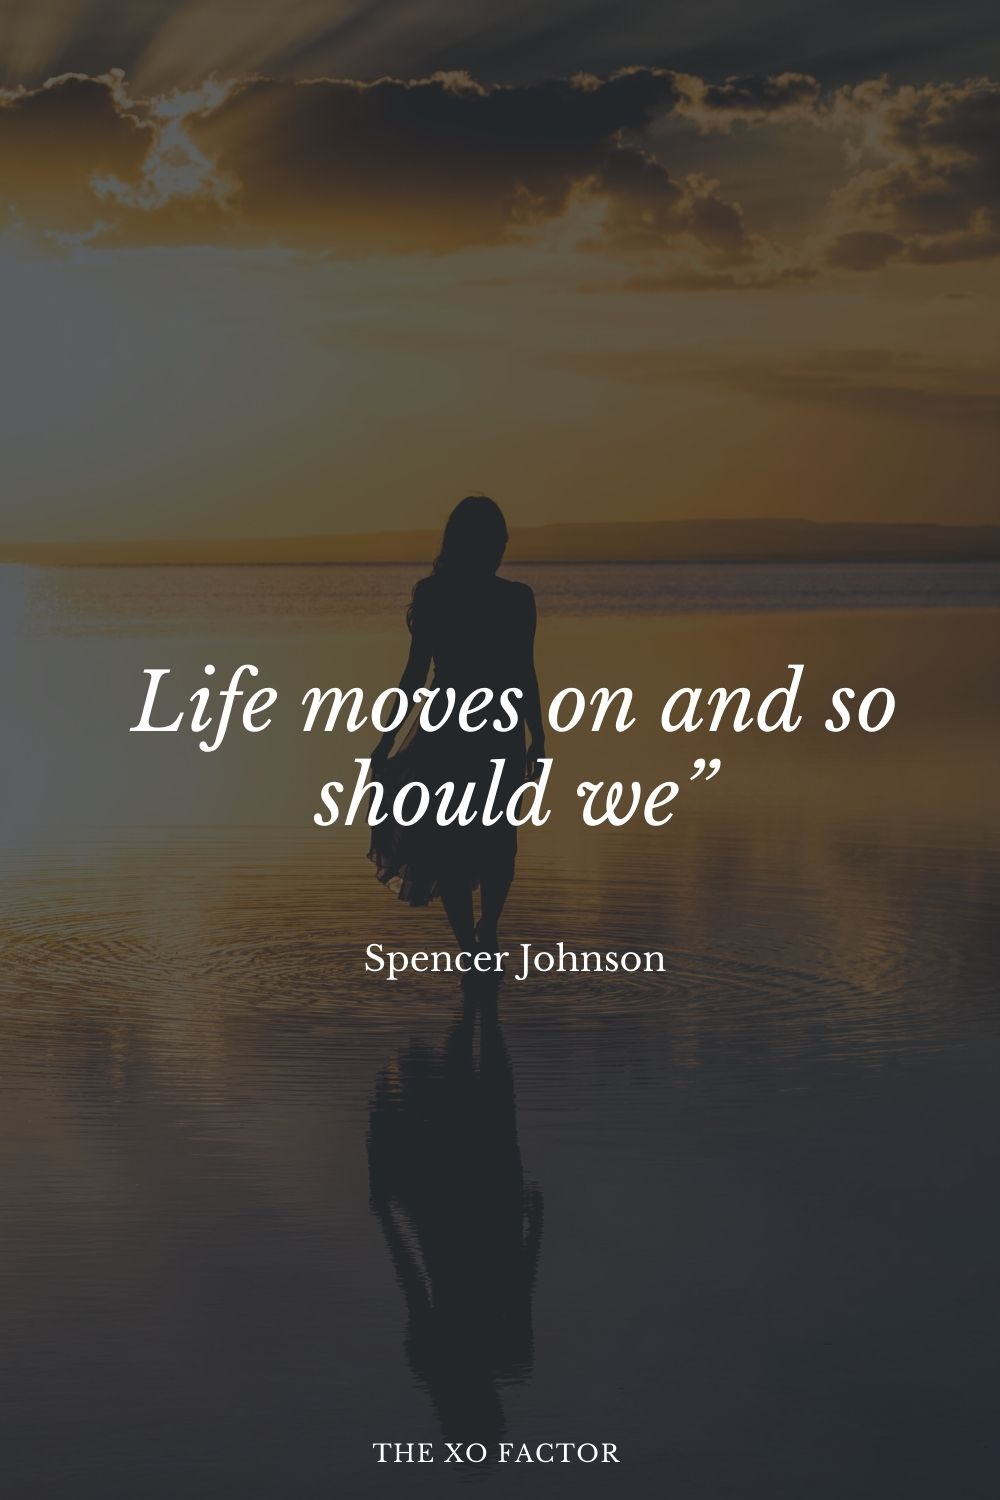 Life moves on and so should we” Spencer Johnson